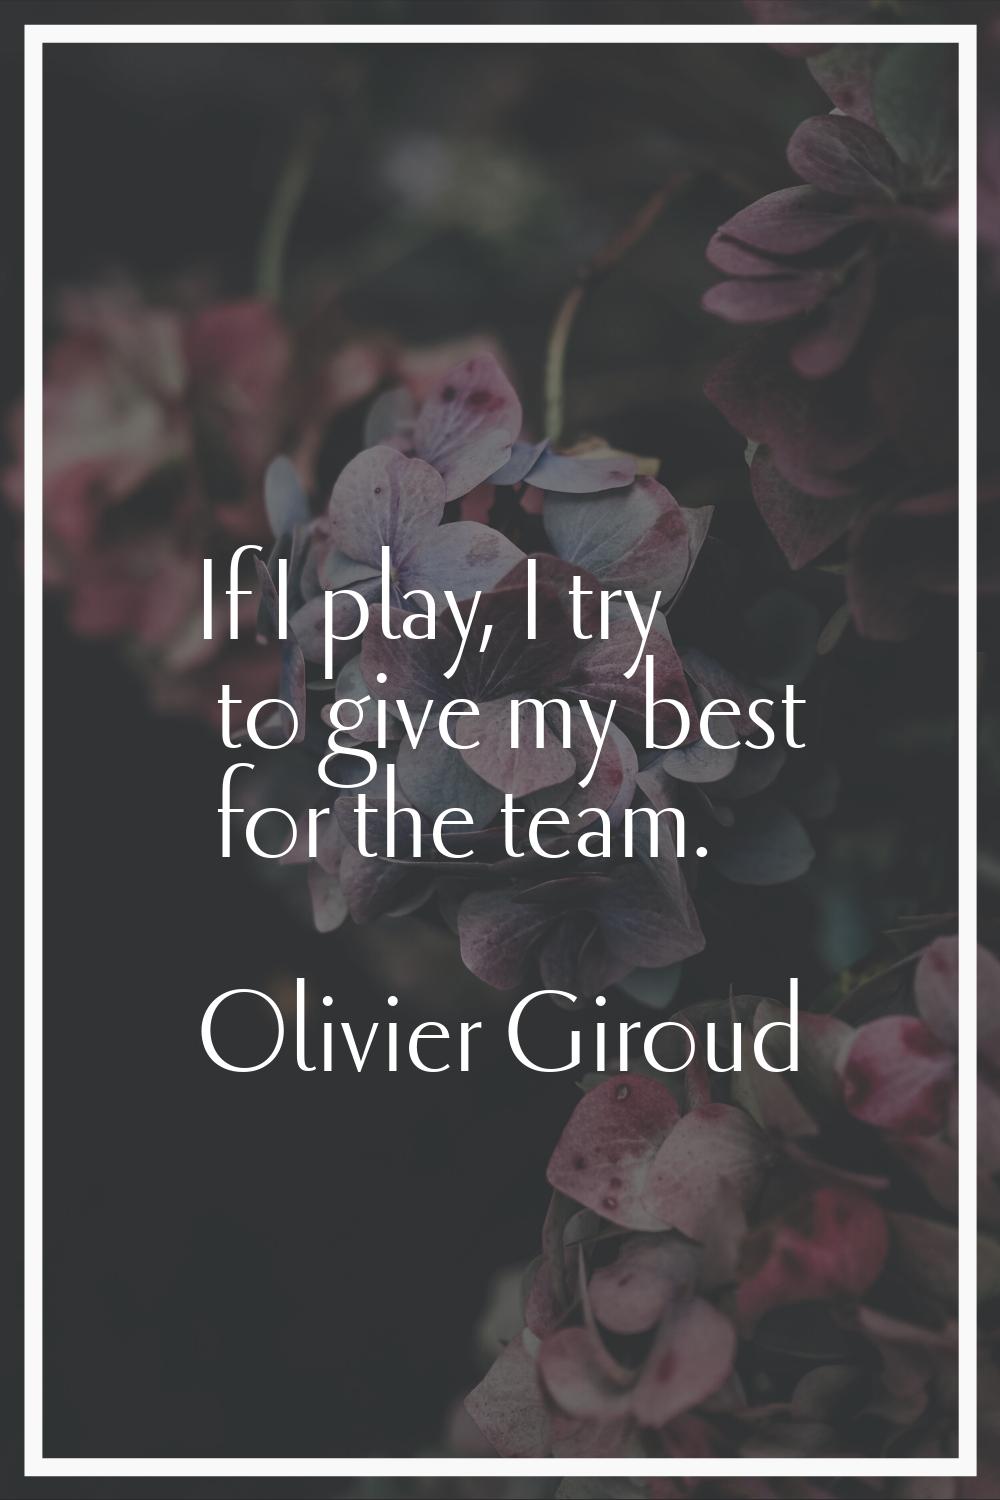 If I play, I try to give my best for the team.